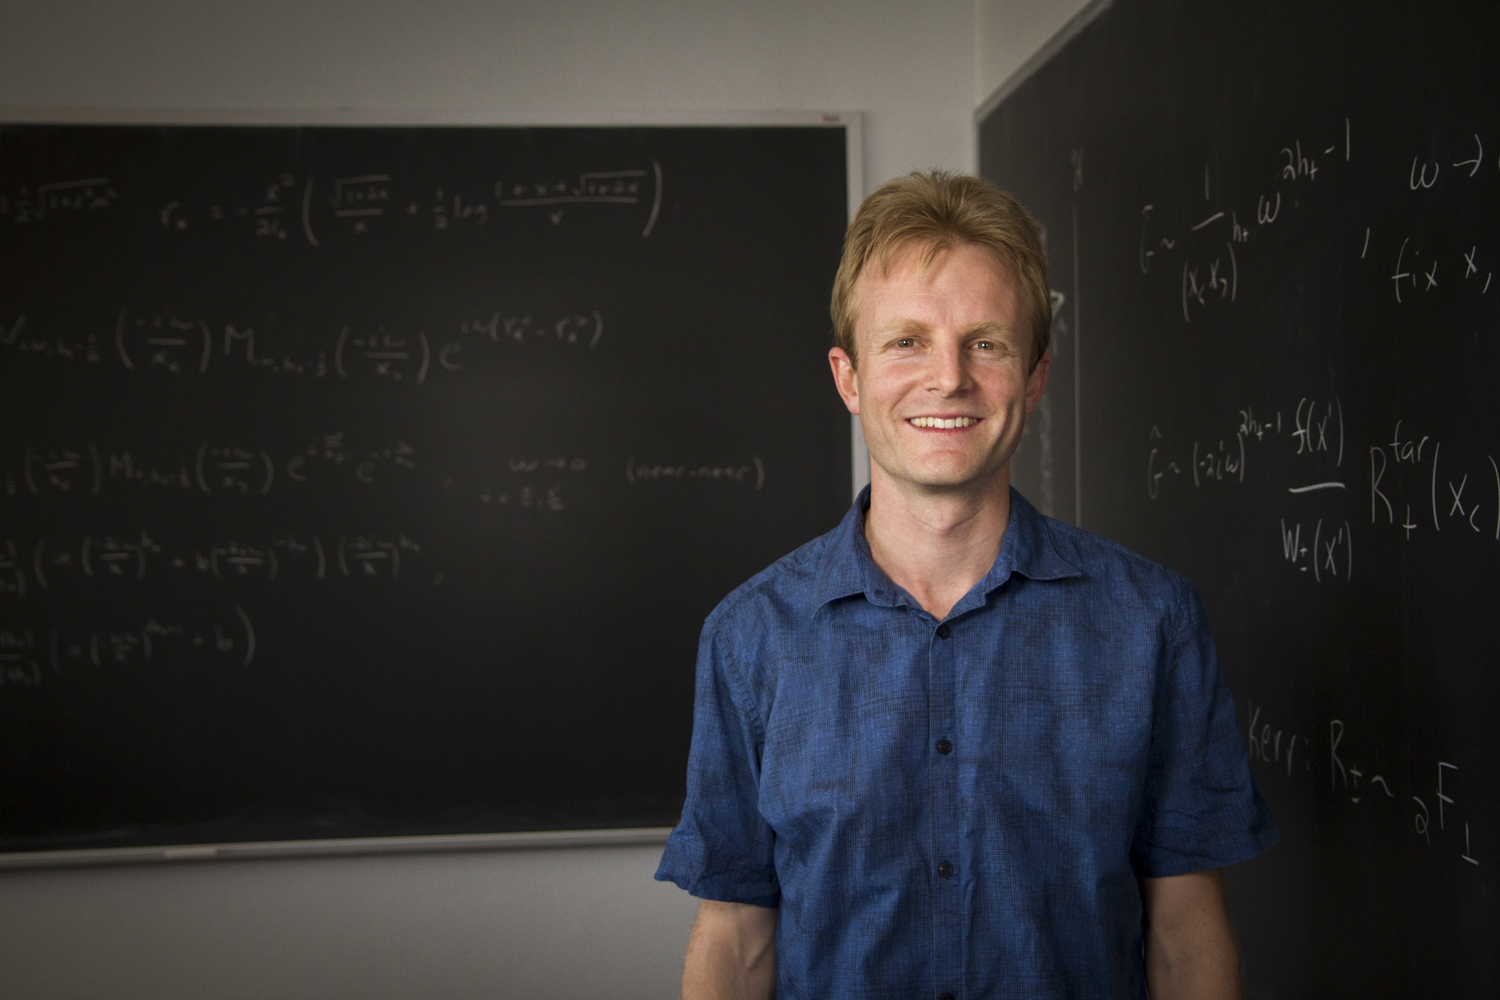 UA physicist Sam Gralla stands in front of two blackboards in his office.